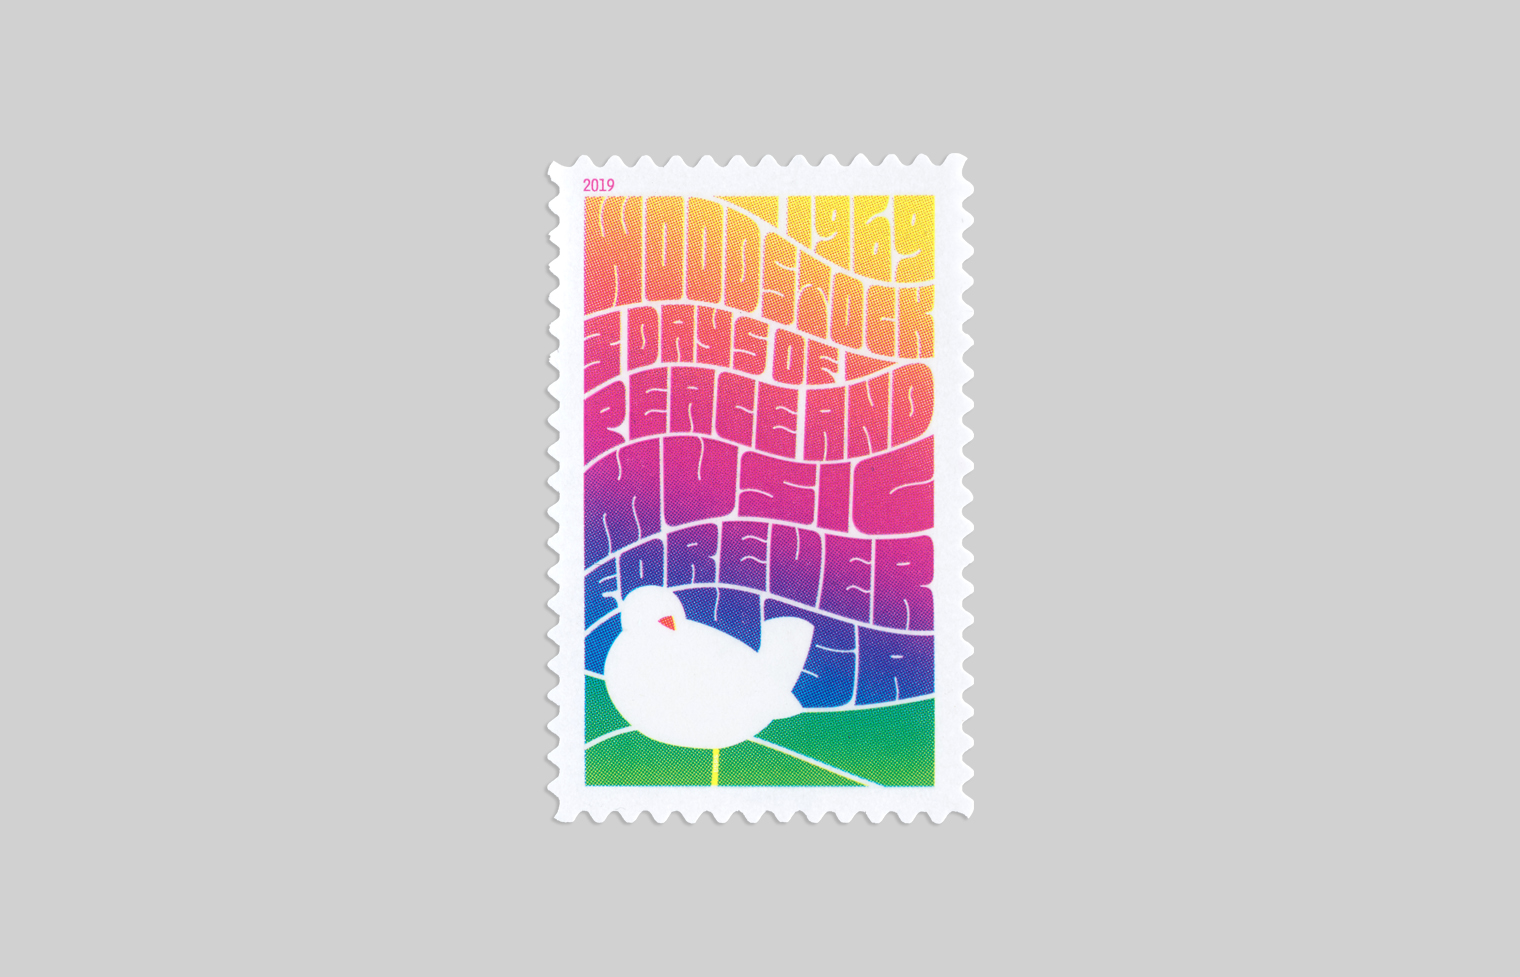 Lettering evoking music posters of the era is combined with the iconic dove to suggest the Woodstock festival